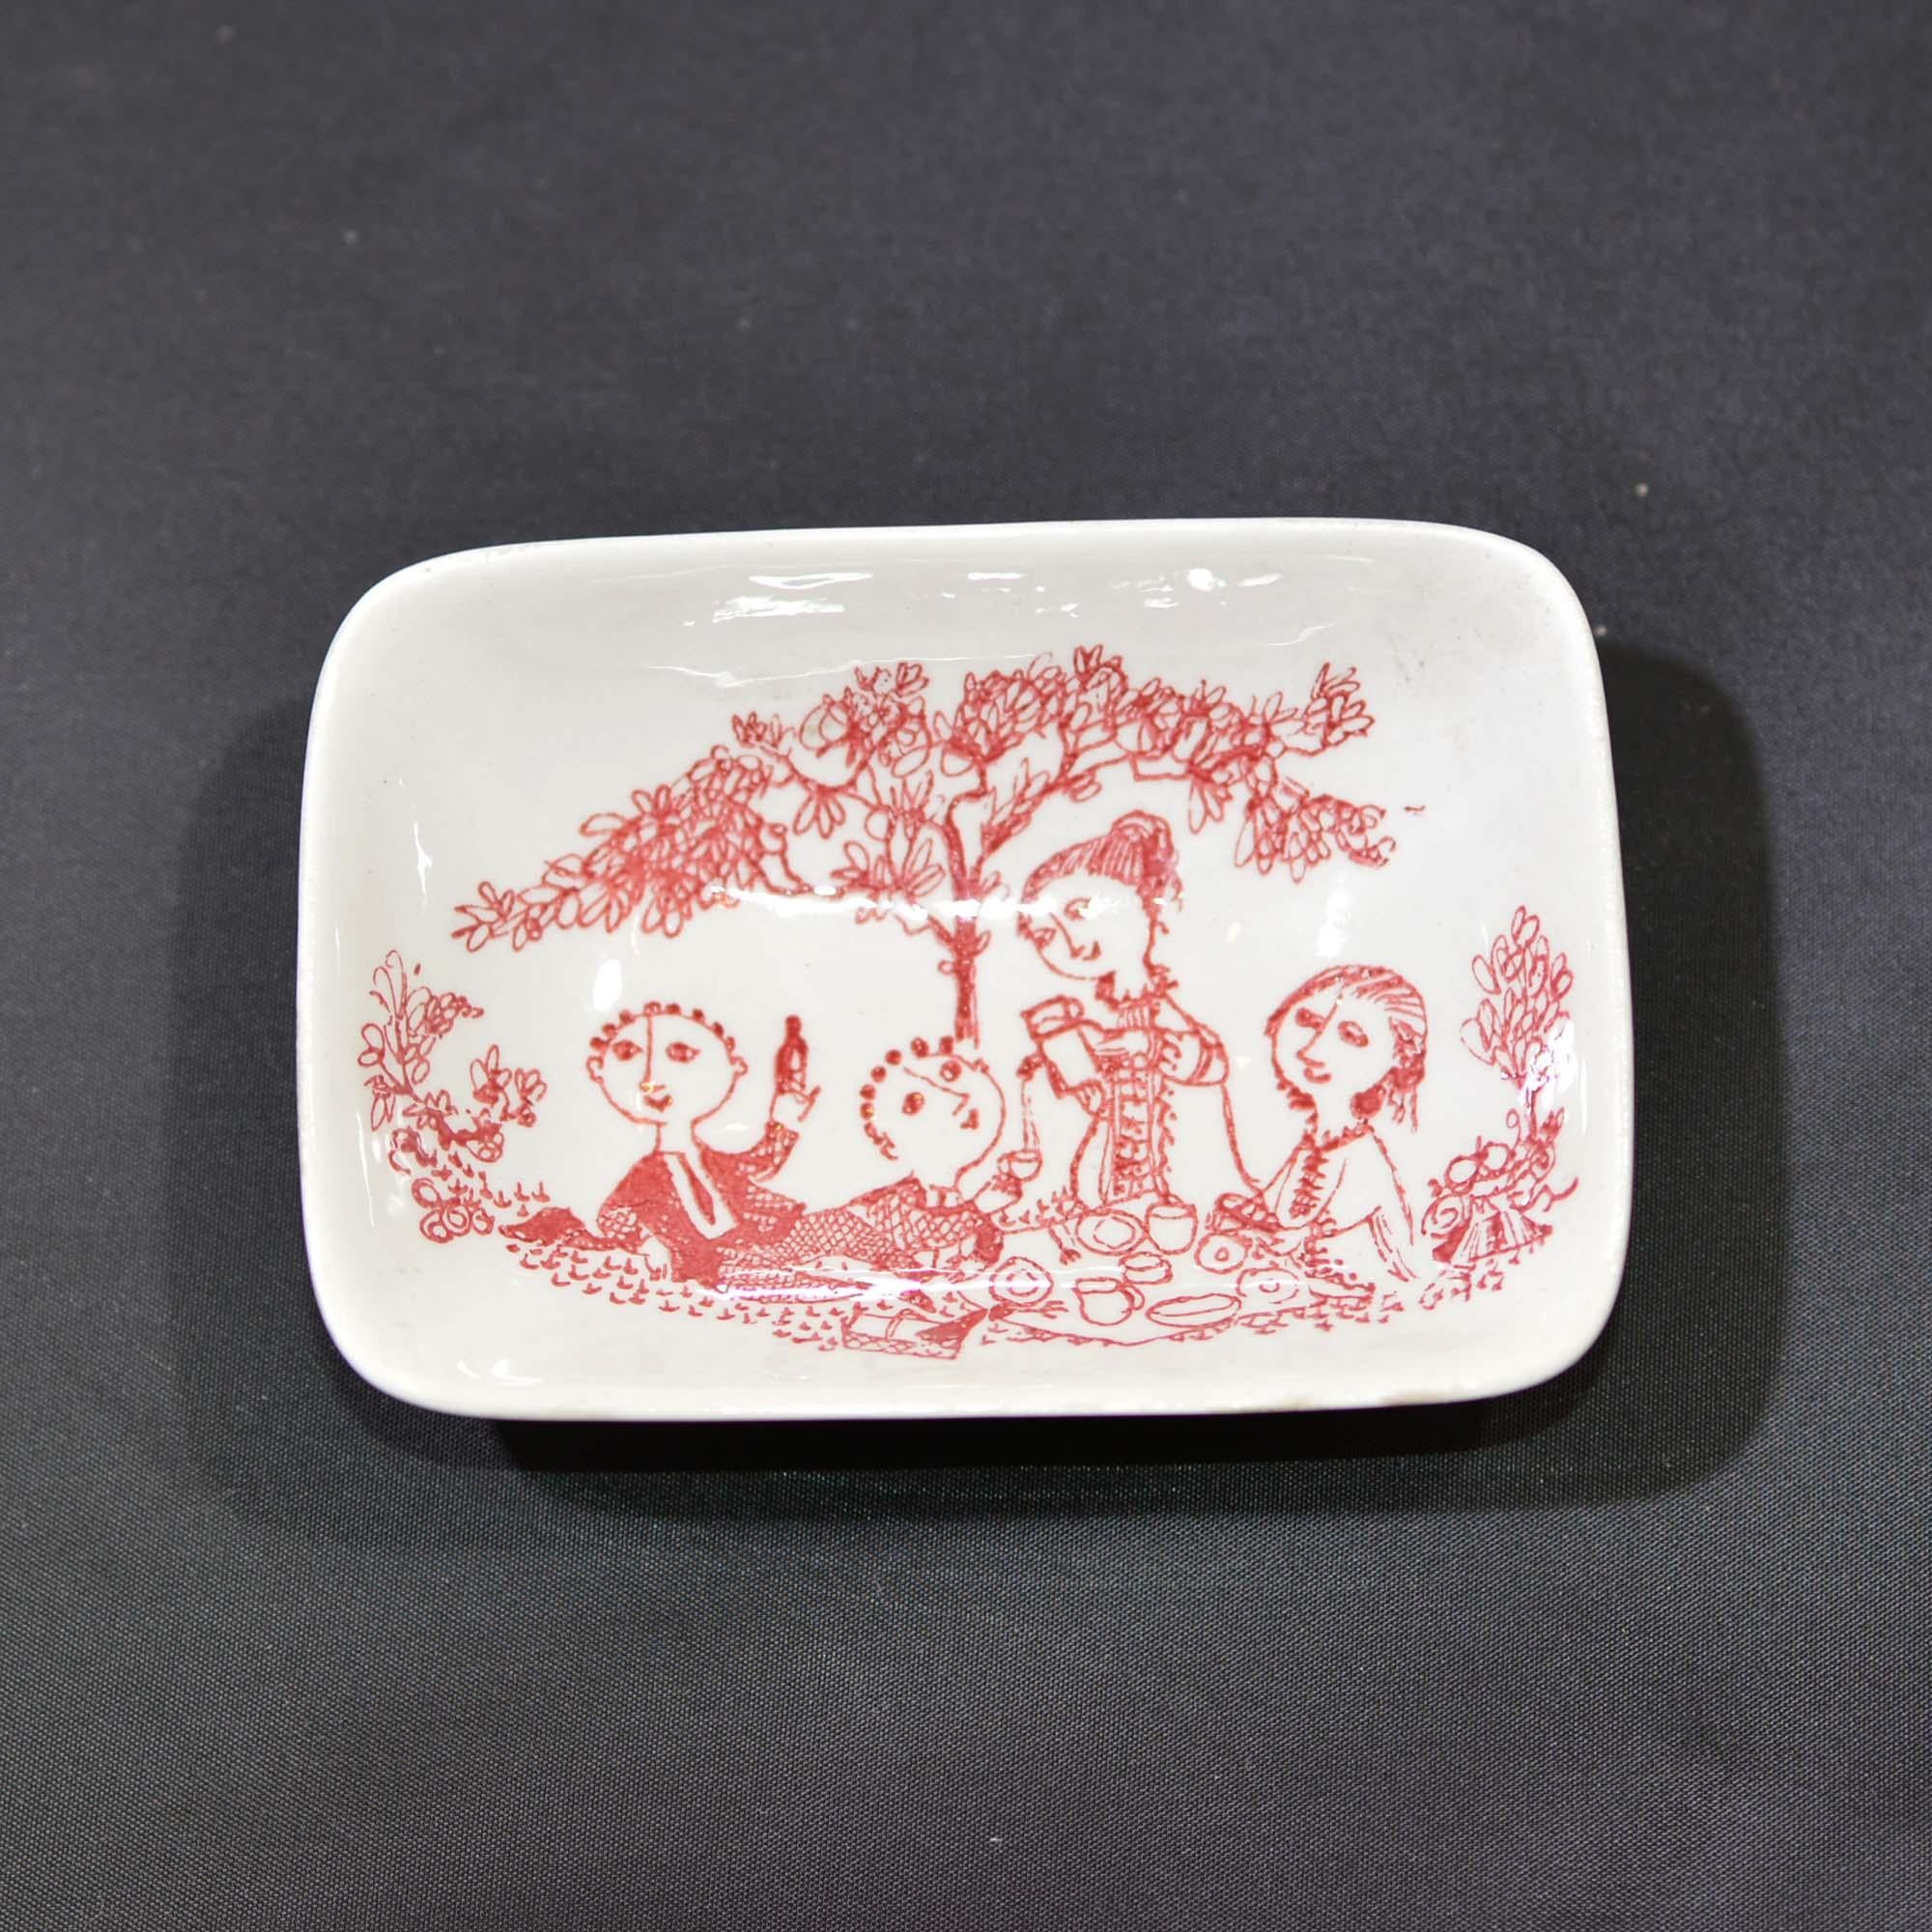 Bridge Ashtray Set by Bjørn Wiinblad for Nymolle Art Faience, Midcentury In Good Condition For Sale In Pataskala, OH